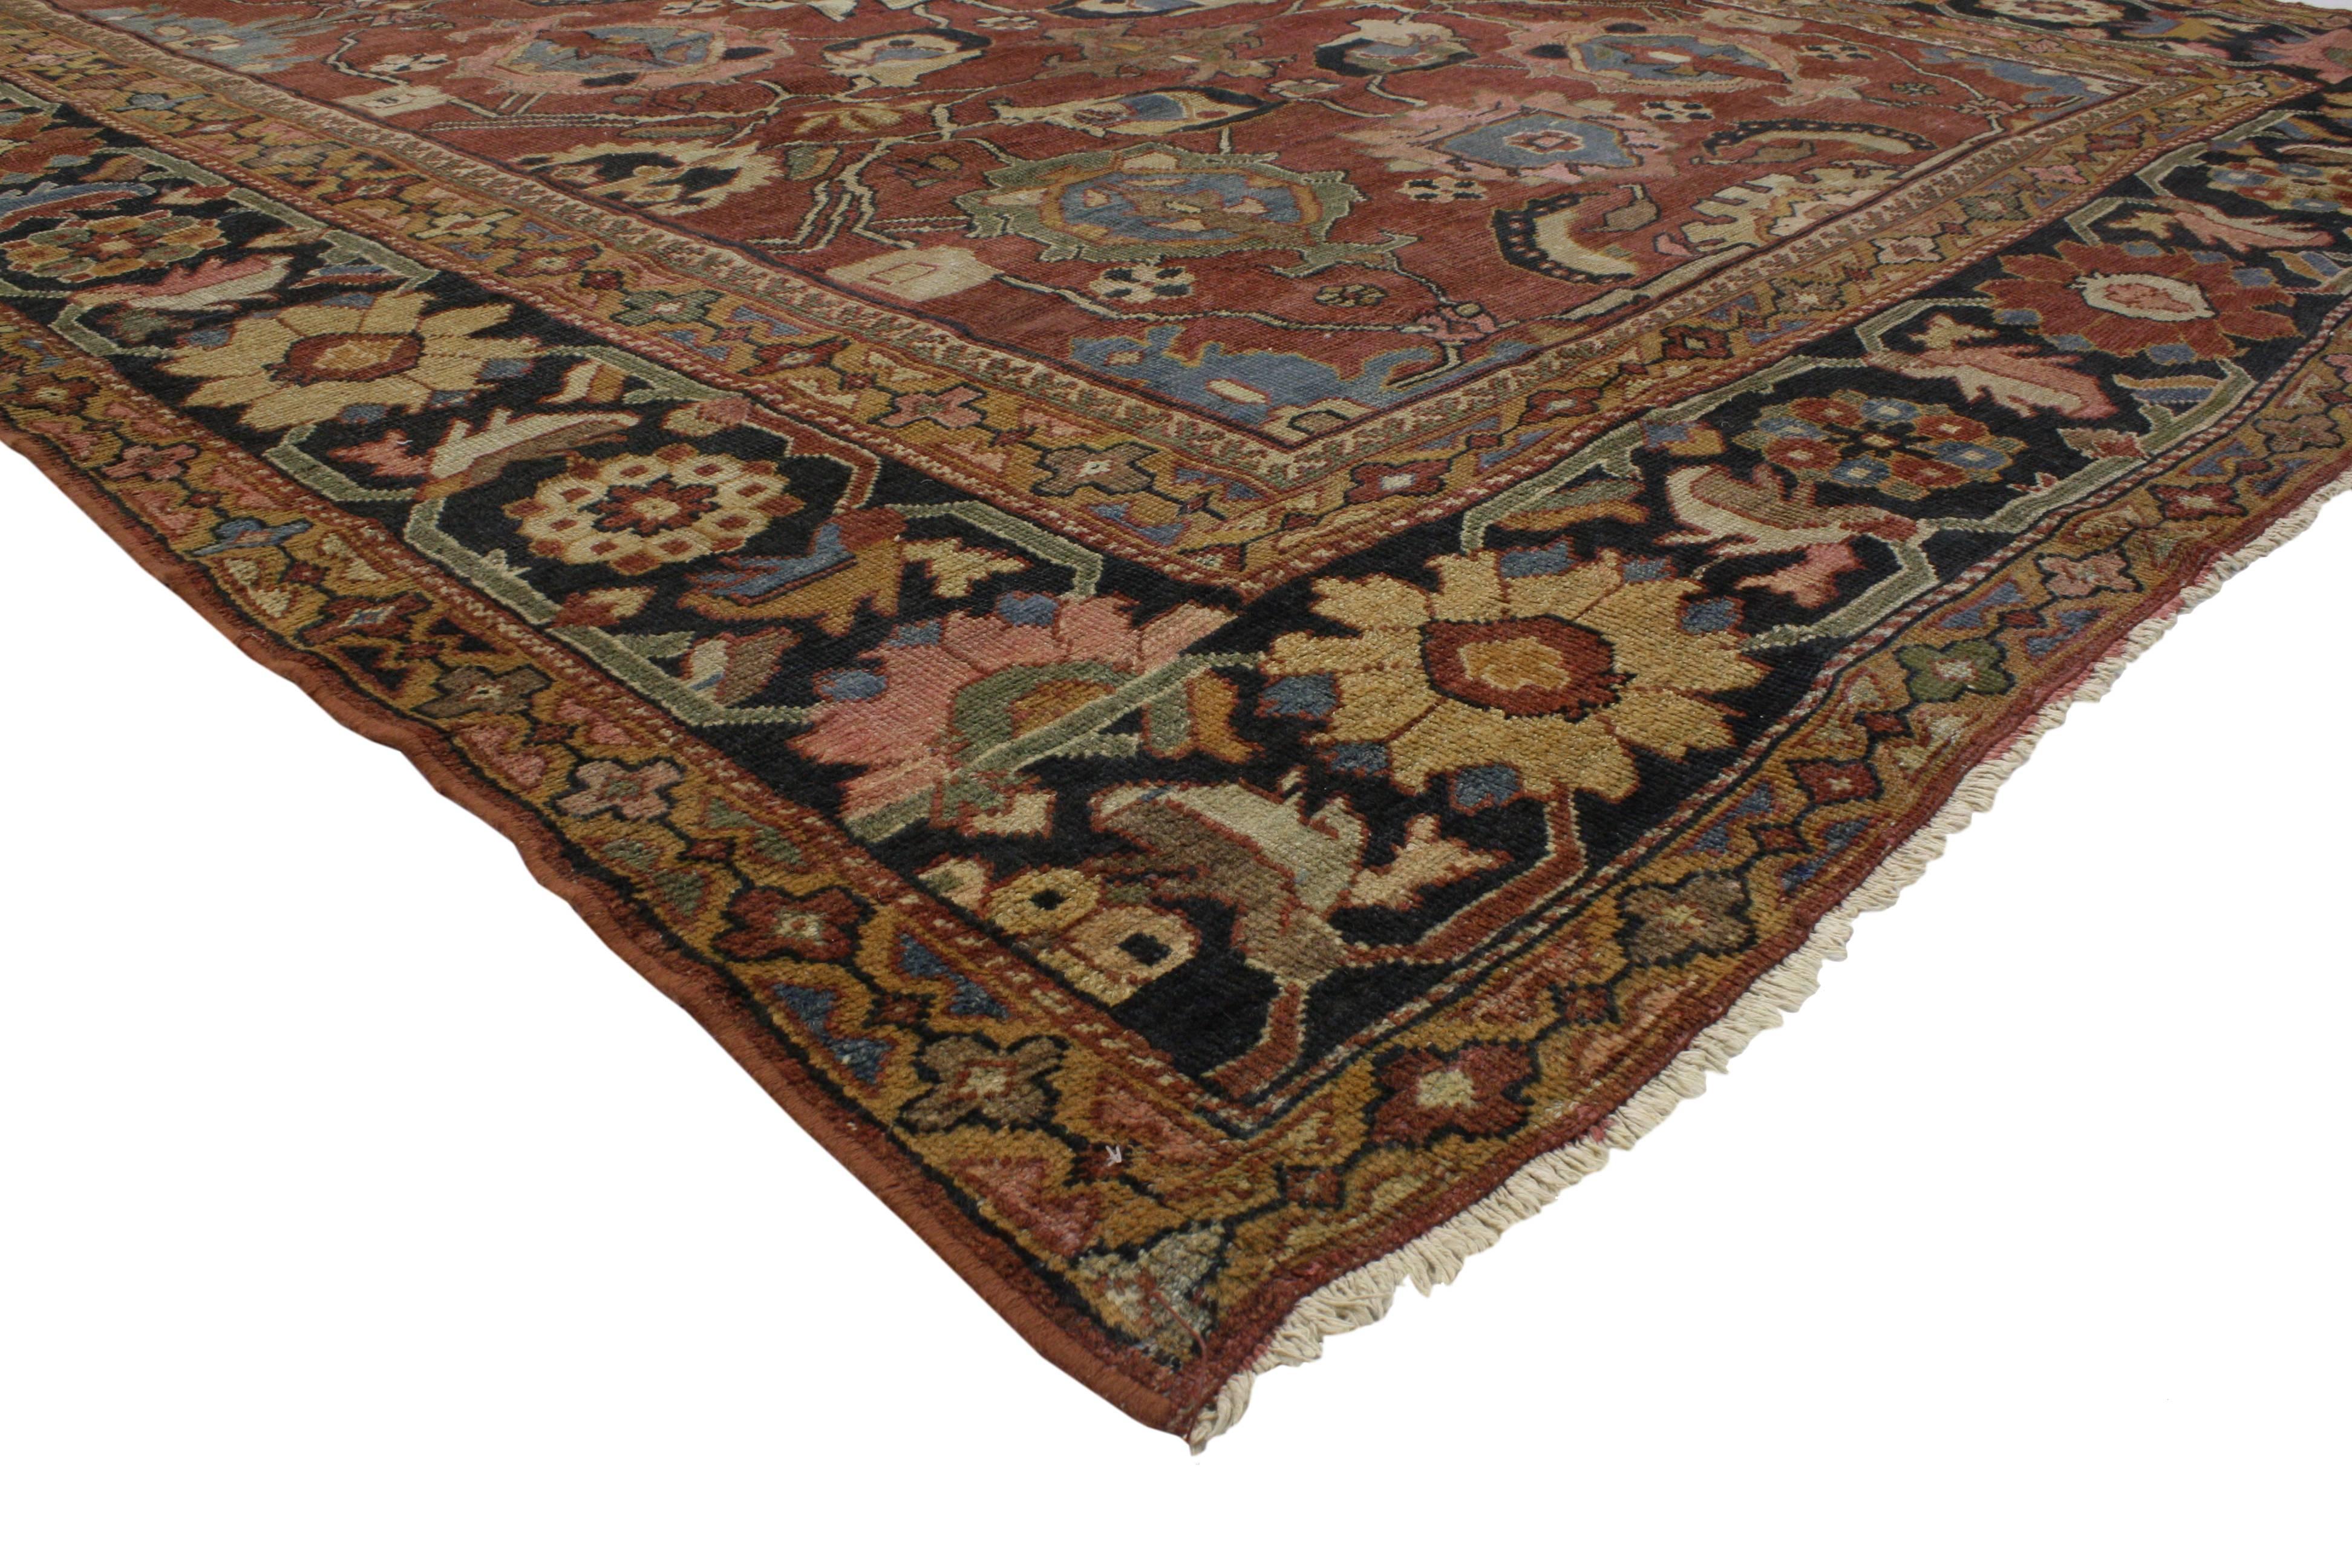 71760 Antique Persian Sultanabad Rug with Arts & Crafts Style 08'01 x 11'07.​​ Sultanabad Rugs are known for their extravagant floral designs, grand scale motifs and exquisite colors. This hand-knotted wool antique Persian Sultanabad rug features an